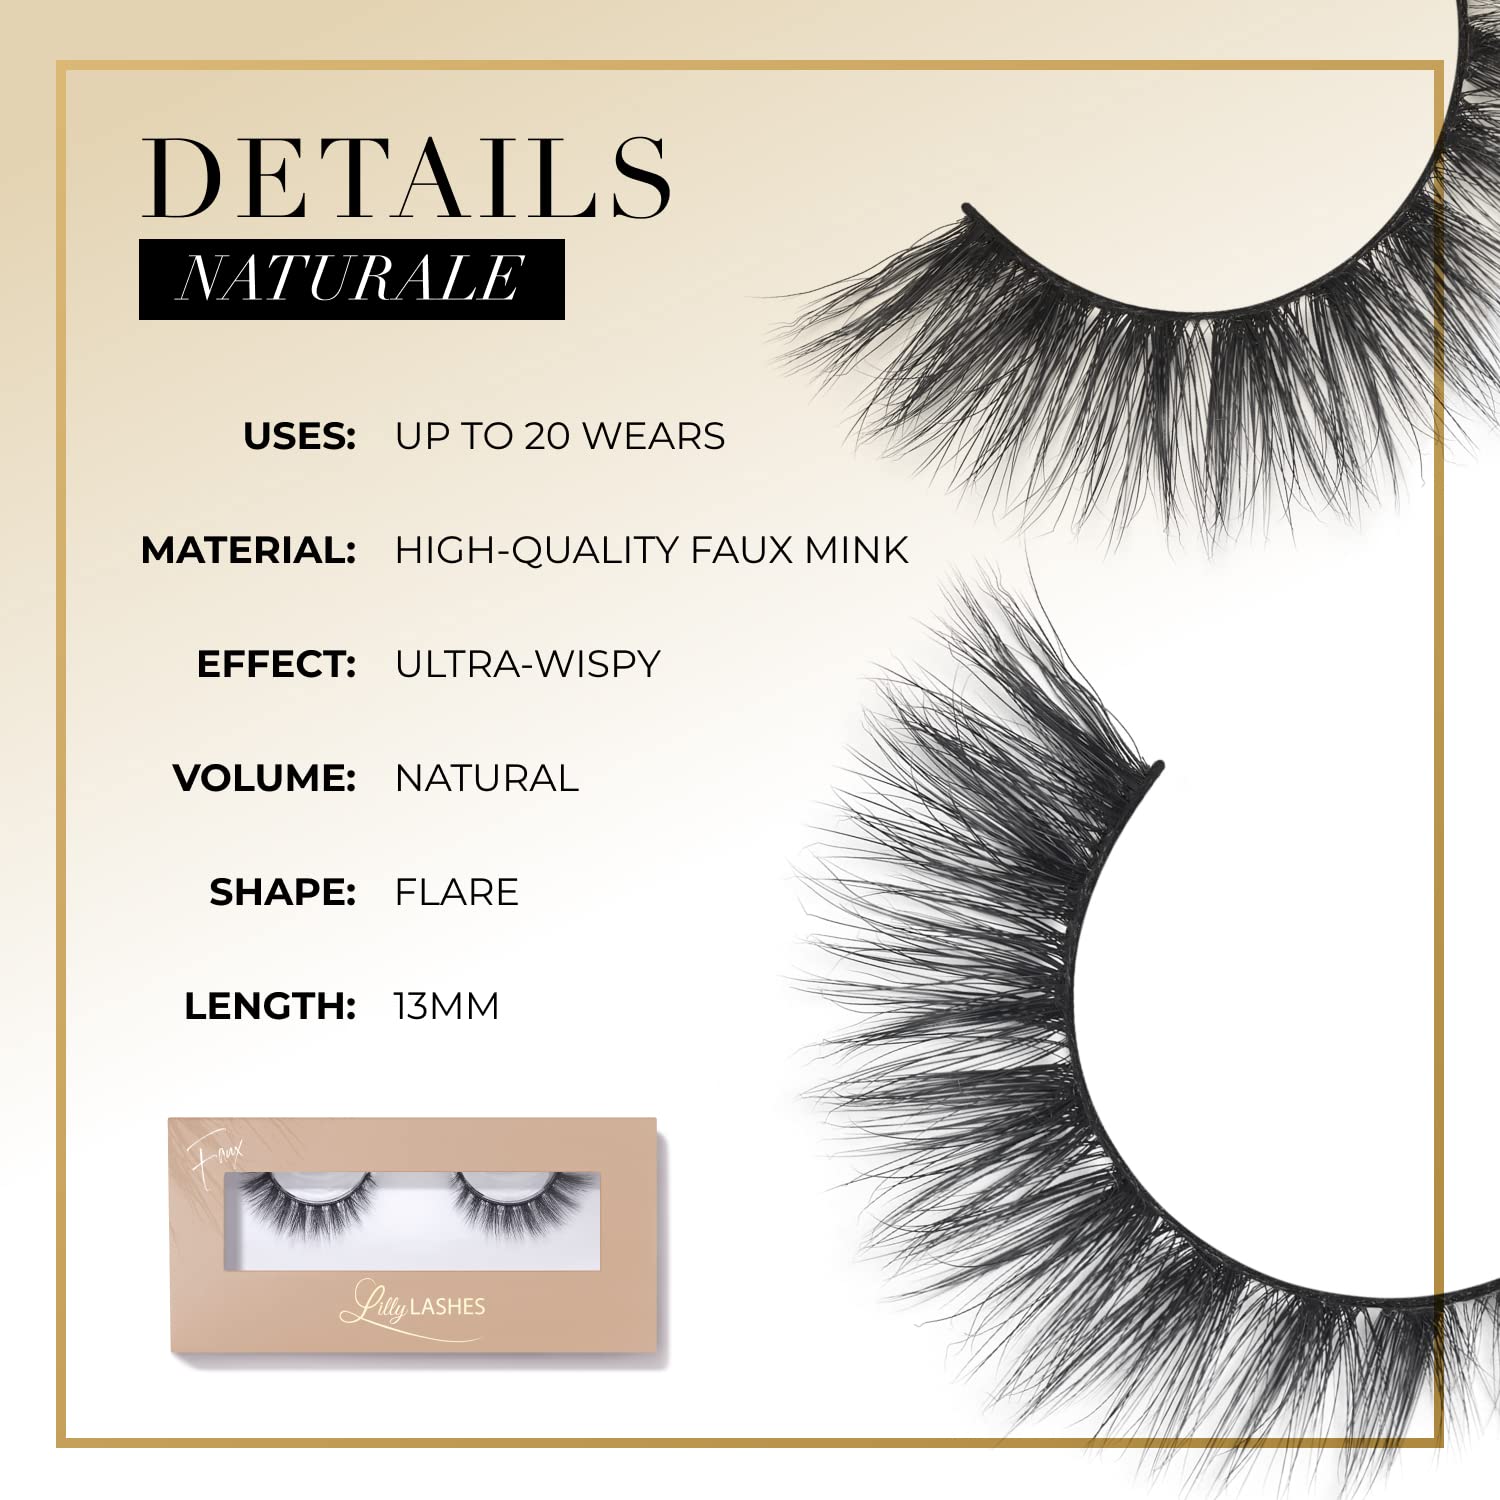 Lilly Lashes Everyday Naturale Faux Mink Lashes False Eyelashes Natural Look Wispy Lashes Cat Eye Lashes Short Lashes Flare Style Strip Lashes Natural Lashes 13 mm Reusable Up to 20 Times